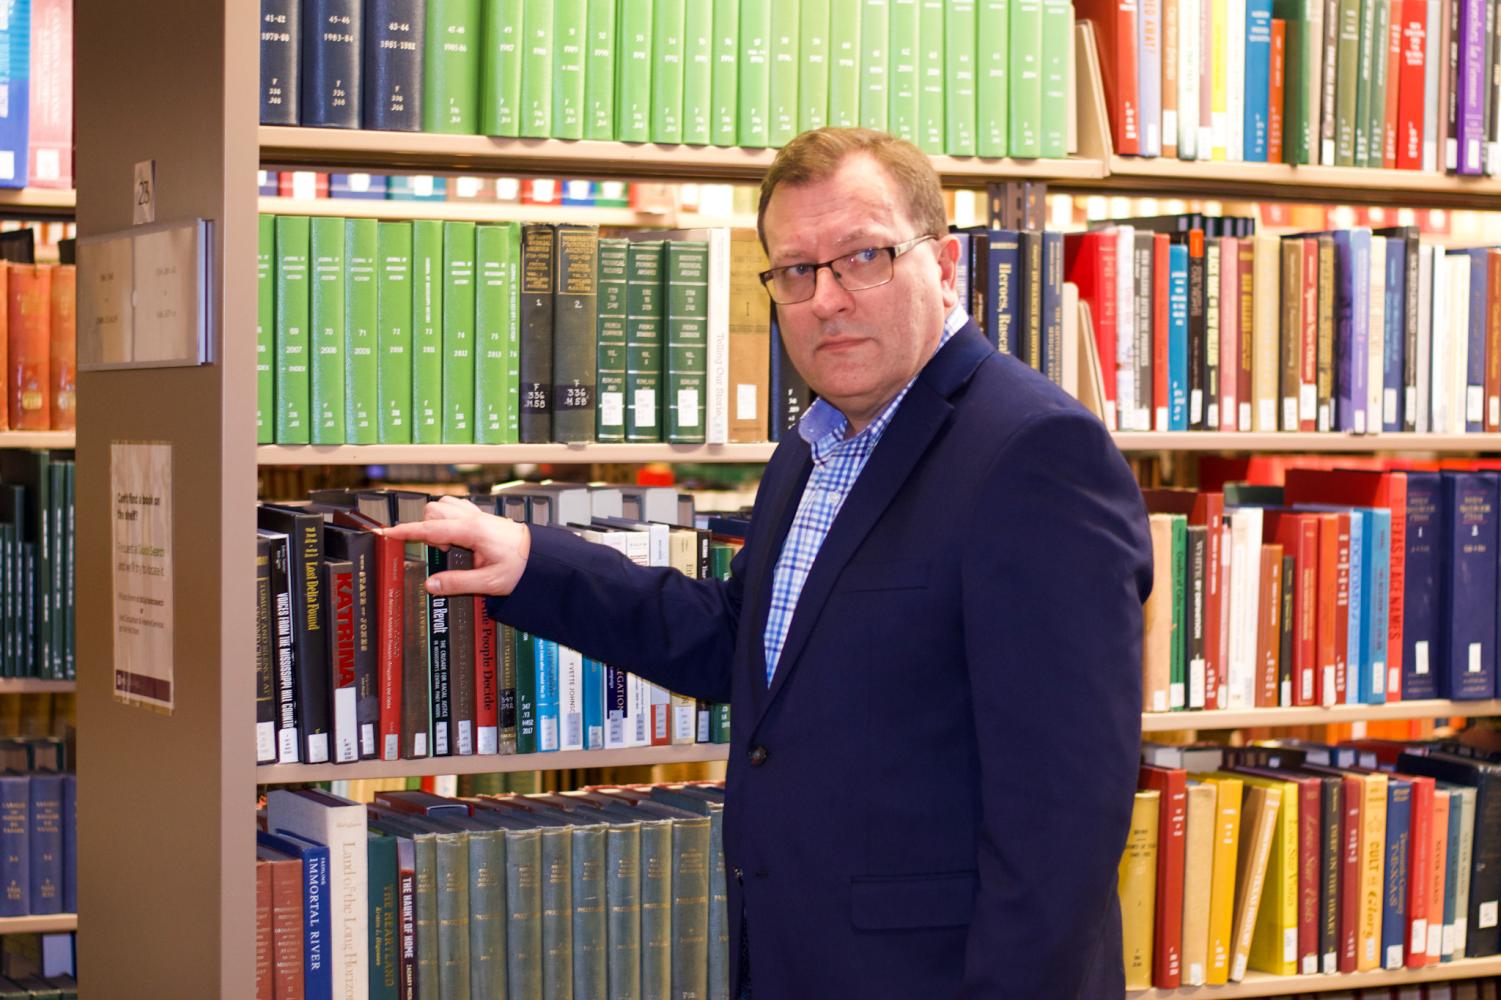 A male wearing glasses, a navy blue blazer and a blue shirt holds the tip of a red book with his right hand. This book is placed on a bookshelf that has multiple rows of books with red, green, blue, black and brown covers.